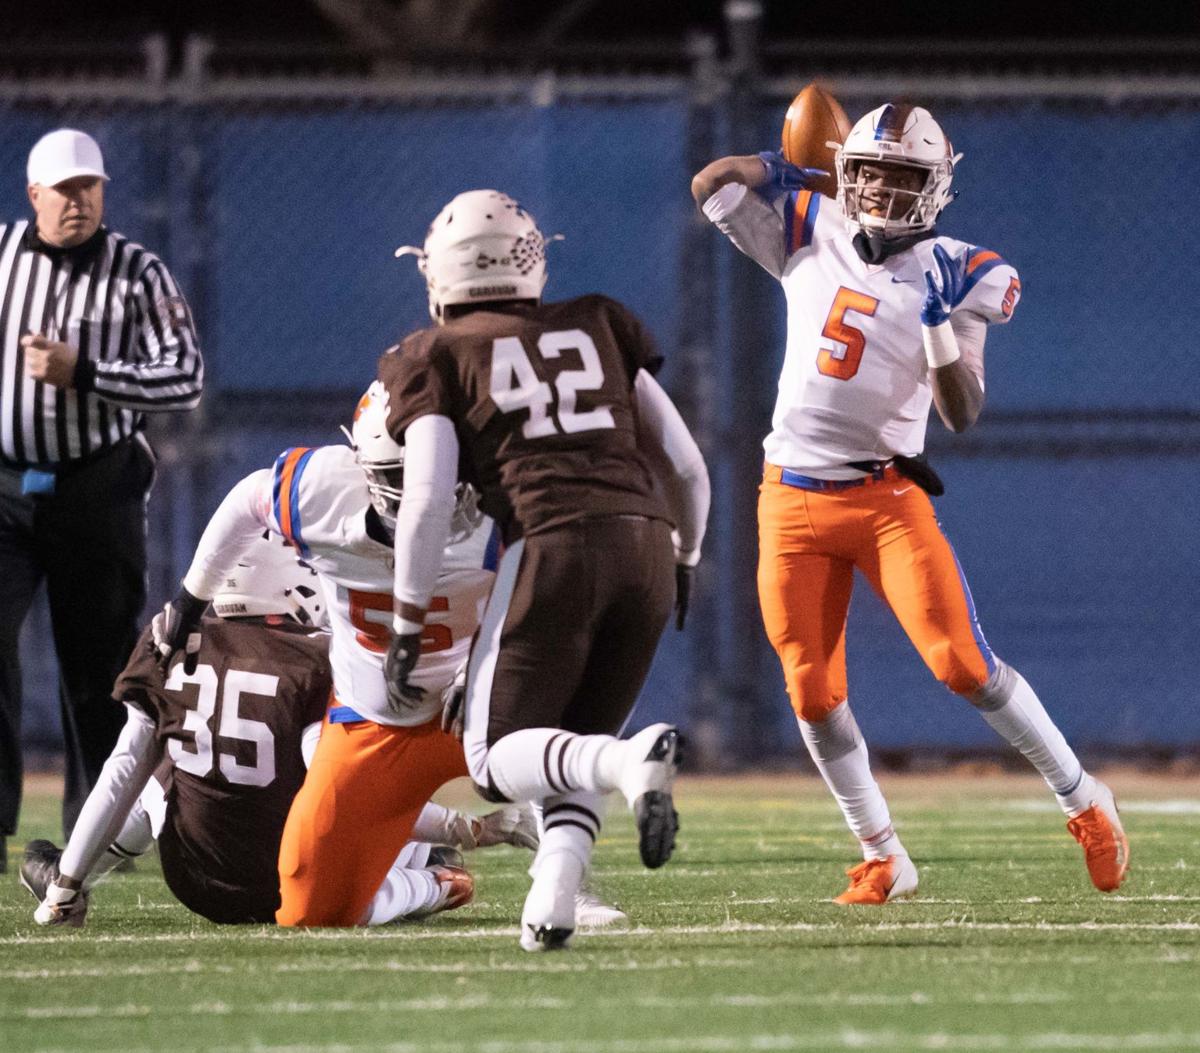 Early miscues hamper East St. Louis in quarterfinal loss to Mount Carmel | High School Football ...